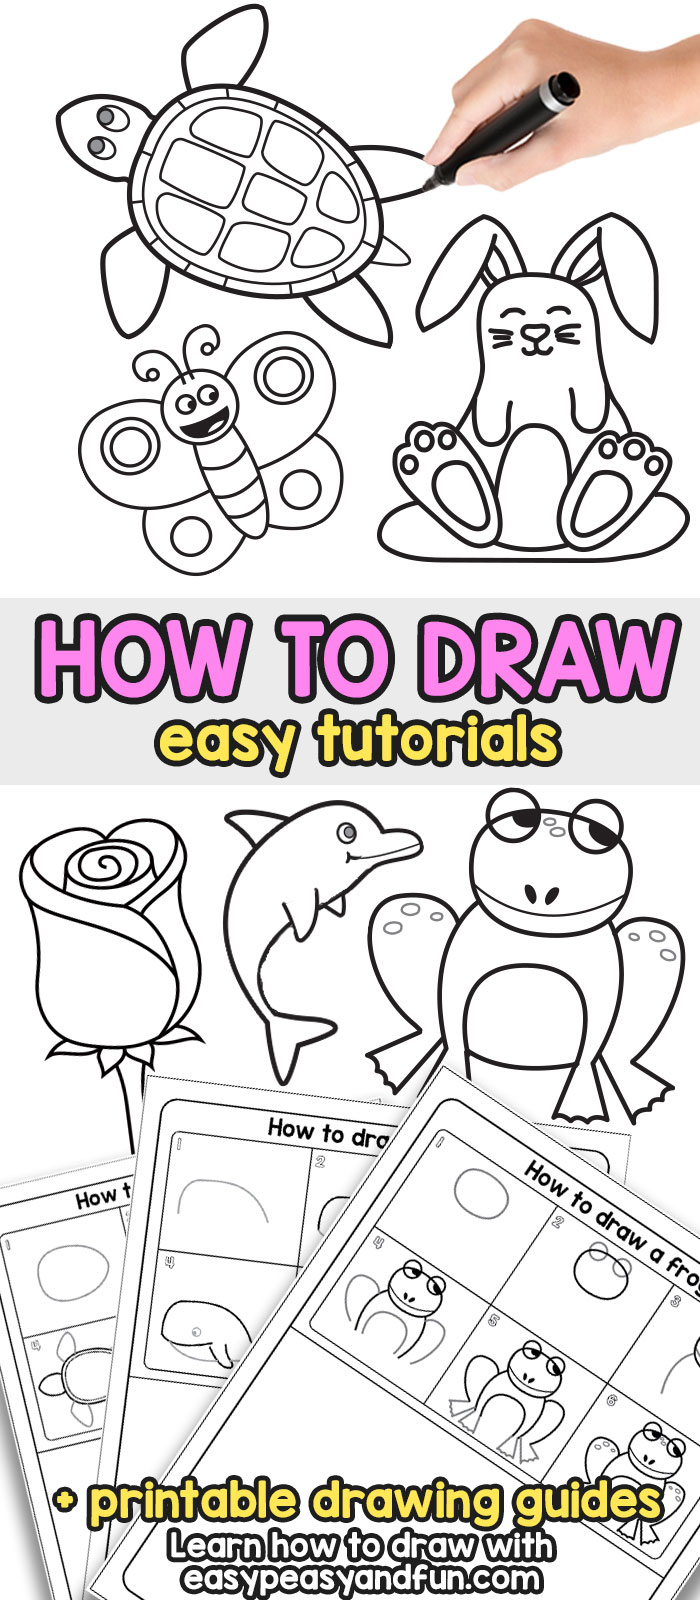 How to Draw - Step by Step Drawing For Kids and Beginners #howtodraw